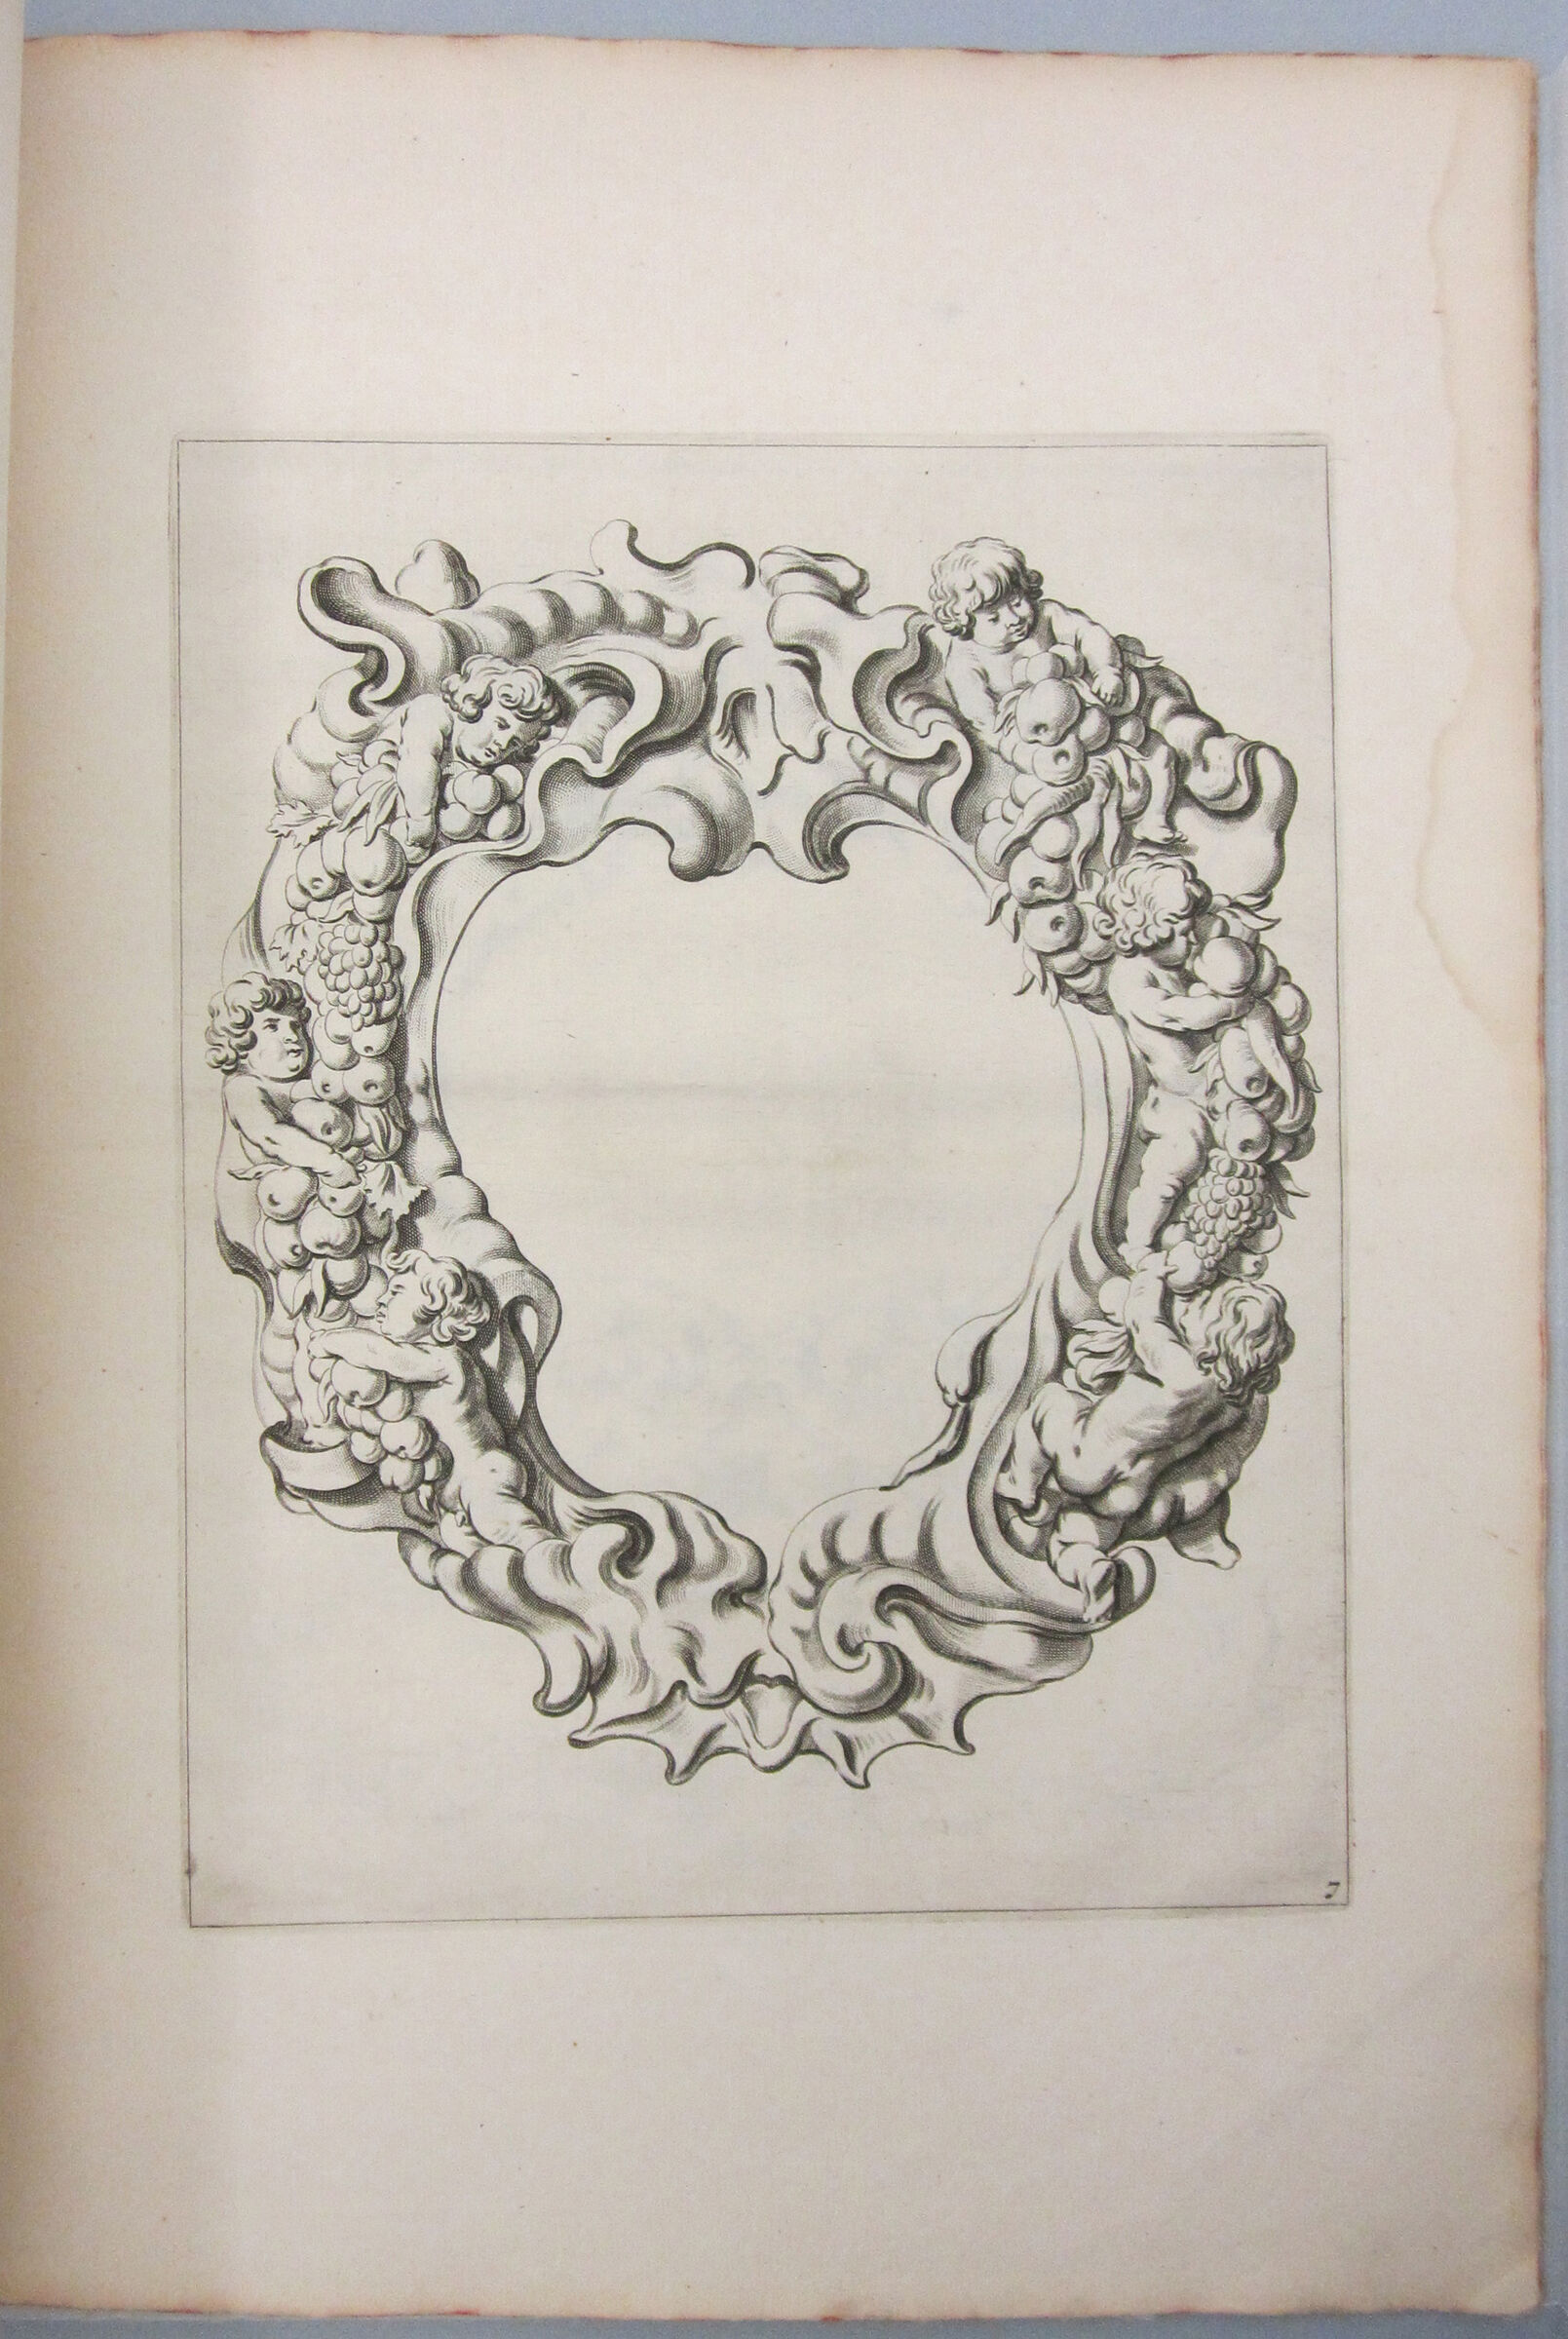 Auricular Cartouche With Six Putti Clasping Fruit Garlands At The Sides